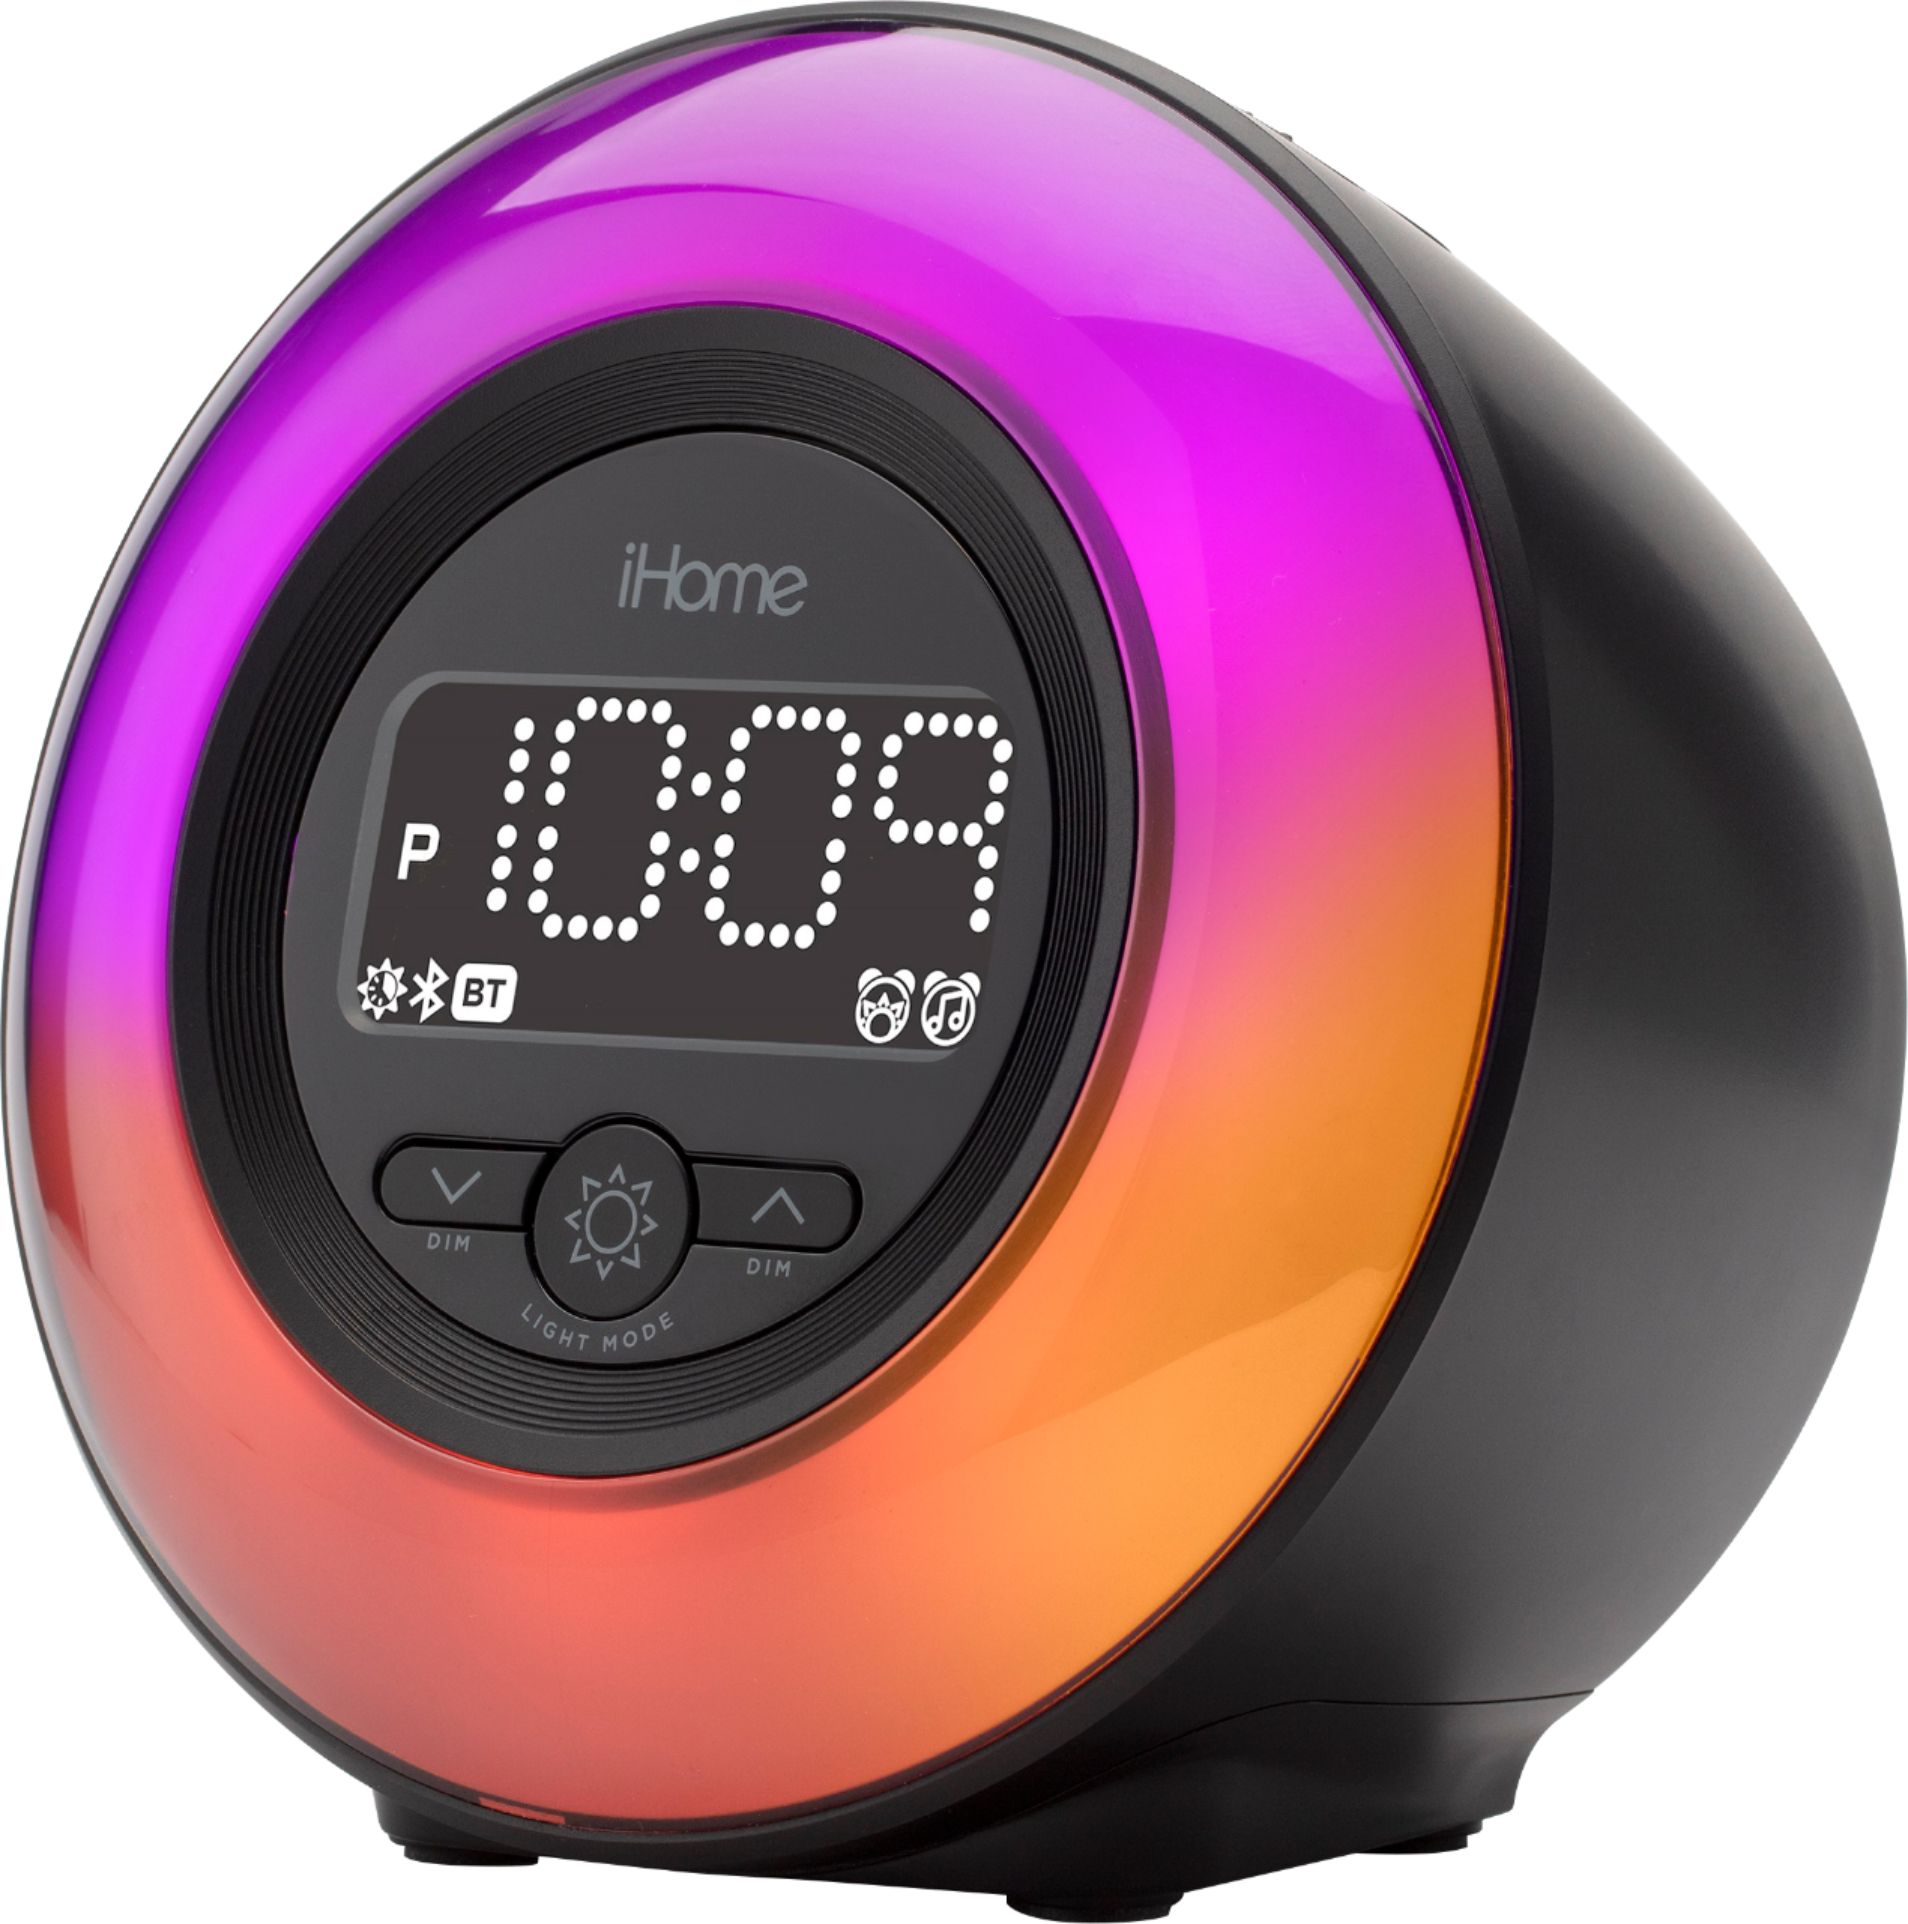 Angle View: iHome - PowerValet - Sleek Alarm Clock with Qi Wireless Charging and USB Charging - Black